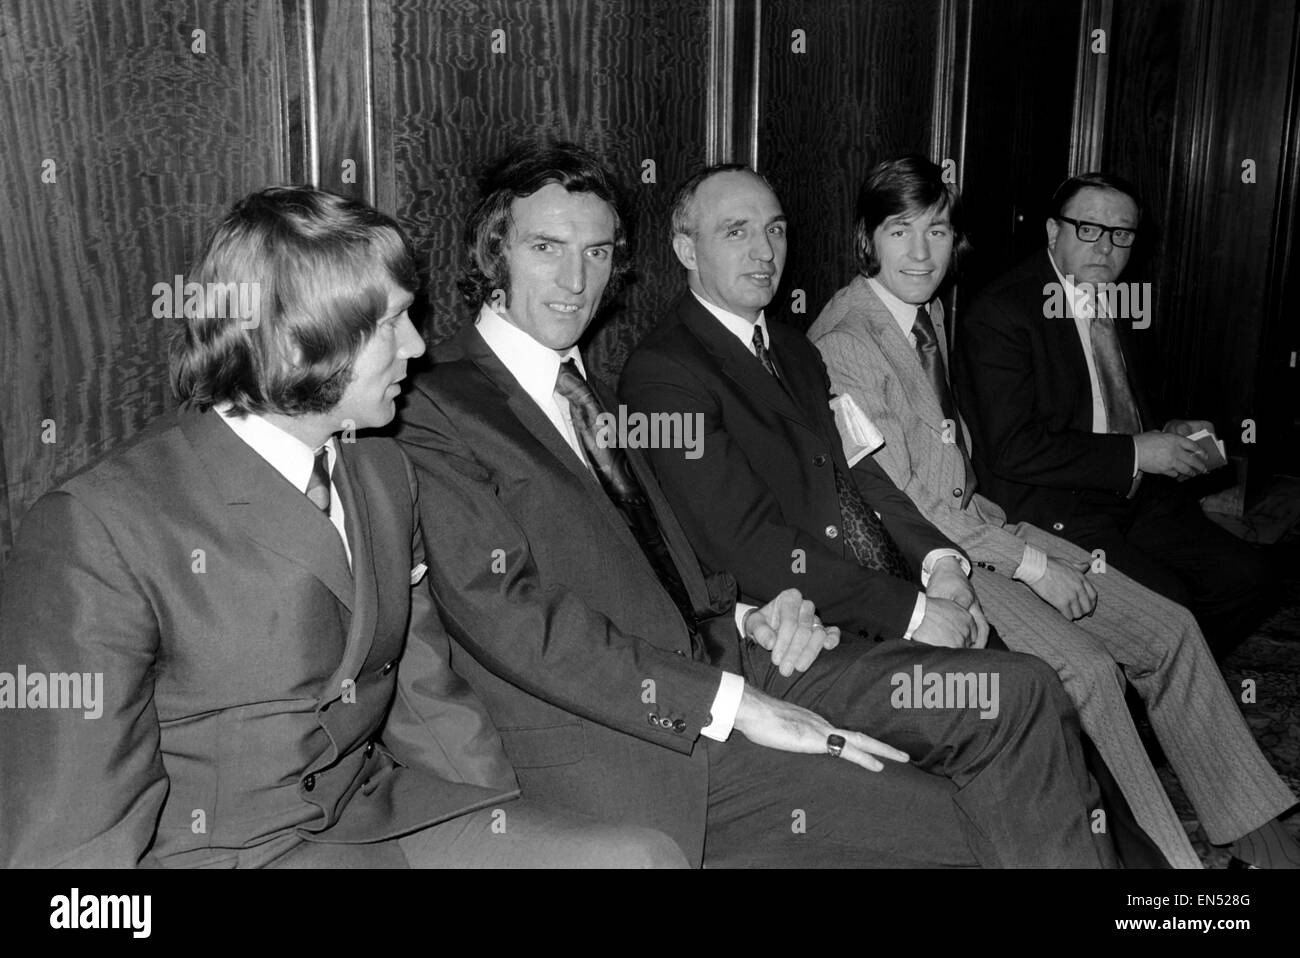 Two Wolves players, their managers and the chairman of the players union attended a disciplinary hearing at the Great Western Hotel. London, today (Monday). Left to right: David Wagstaff, Derek Dougan, Bill McGarry (Wolves manager) and Jimmy McCalliog wai Stock Photo